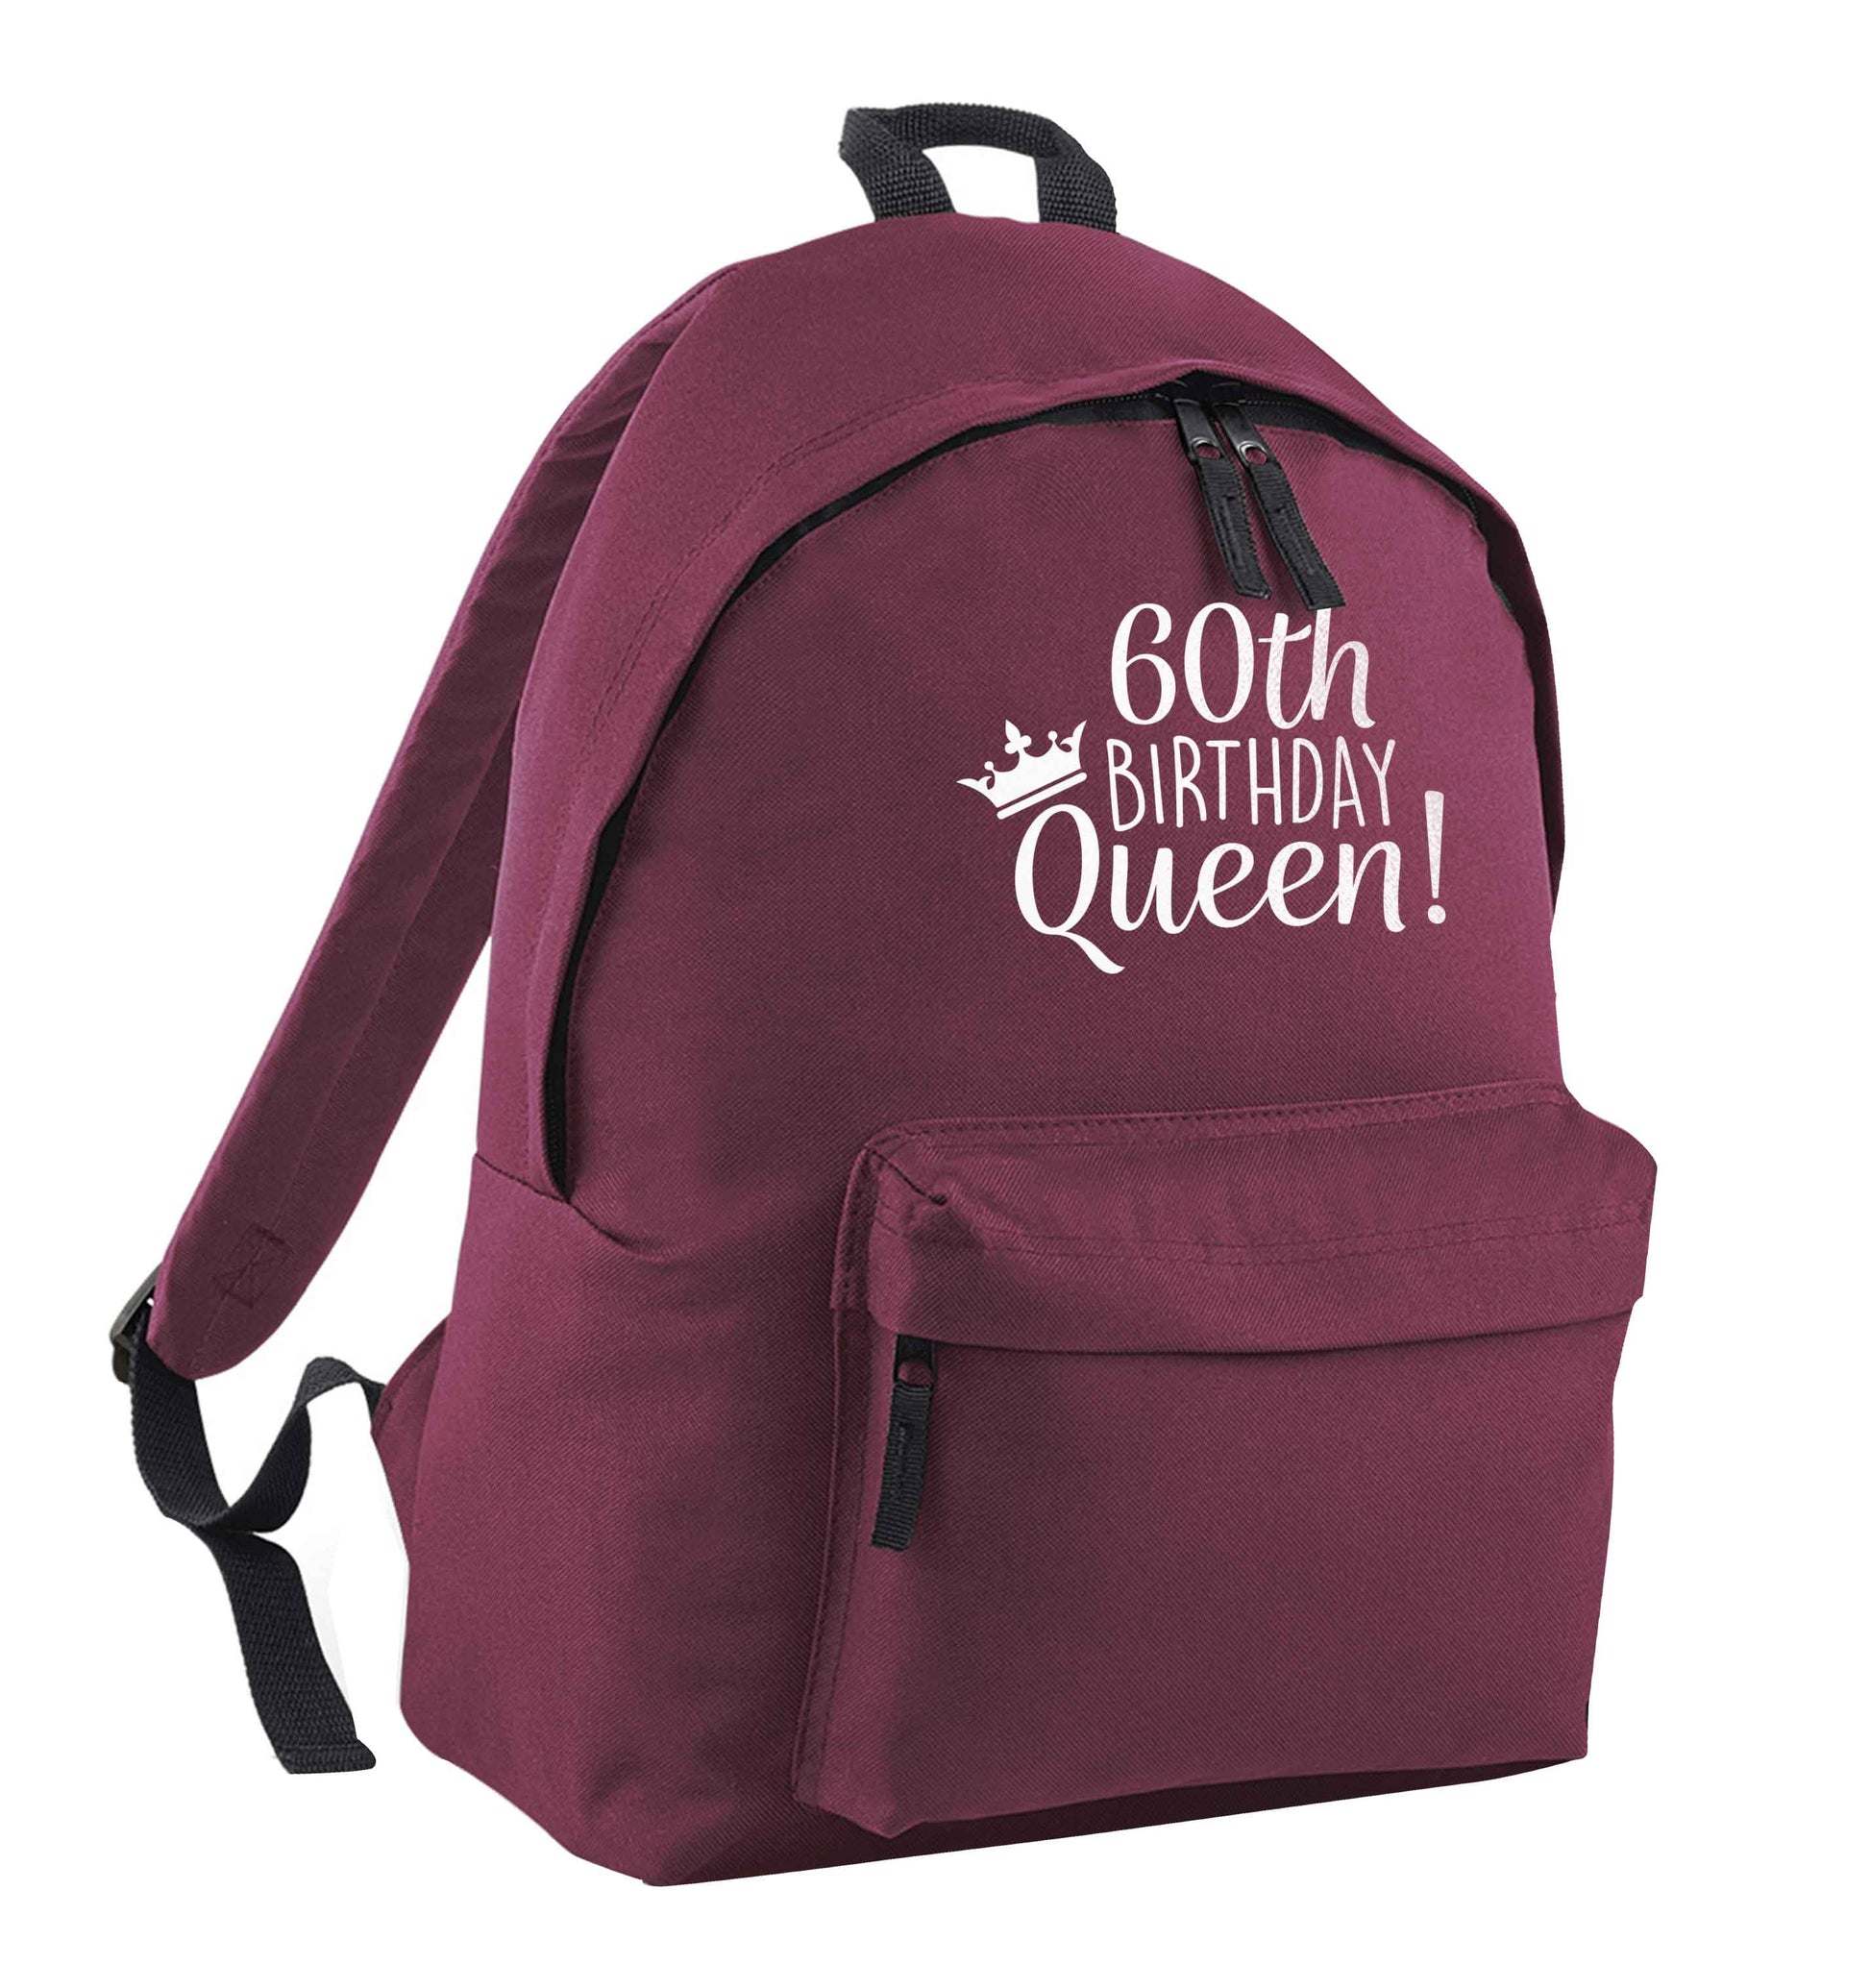 60th birthday Queen maroon adults backpack